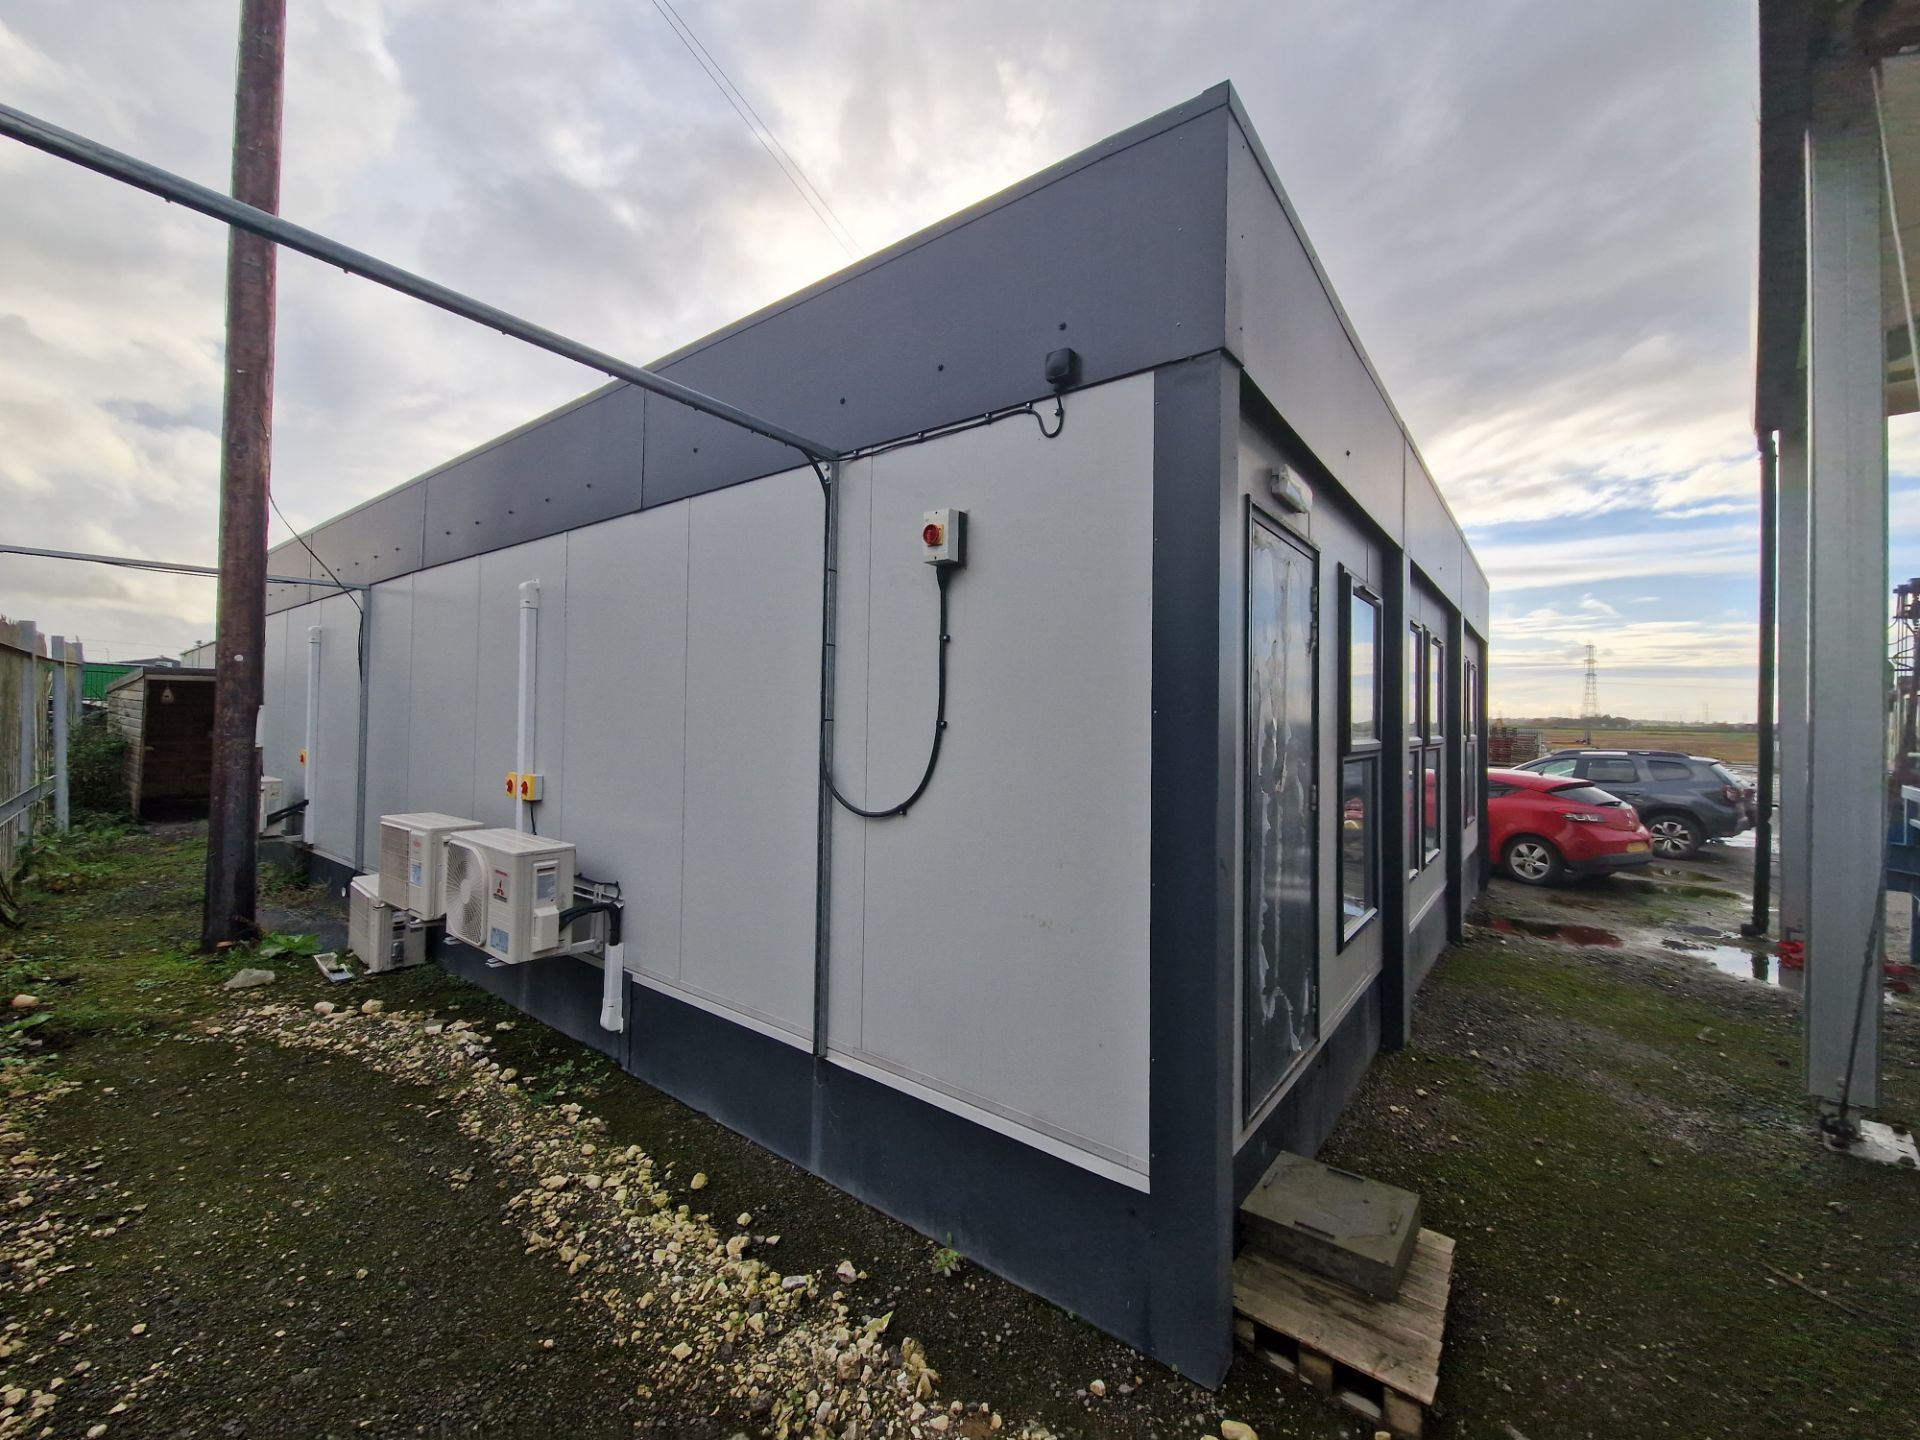 12m x 9m x 2.5m Jack Leg 'Main Office' Cabin (Reserve Removal Until Contents Cleared) (Electrics - Image 4 of 17